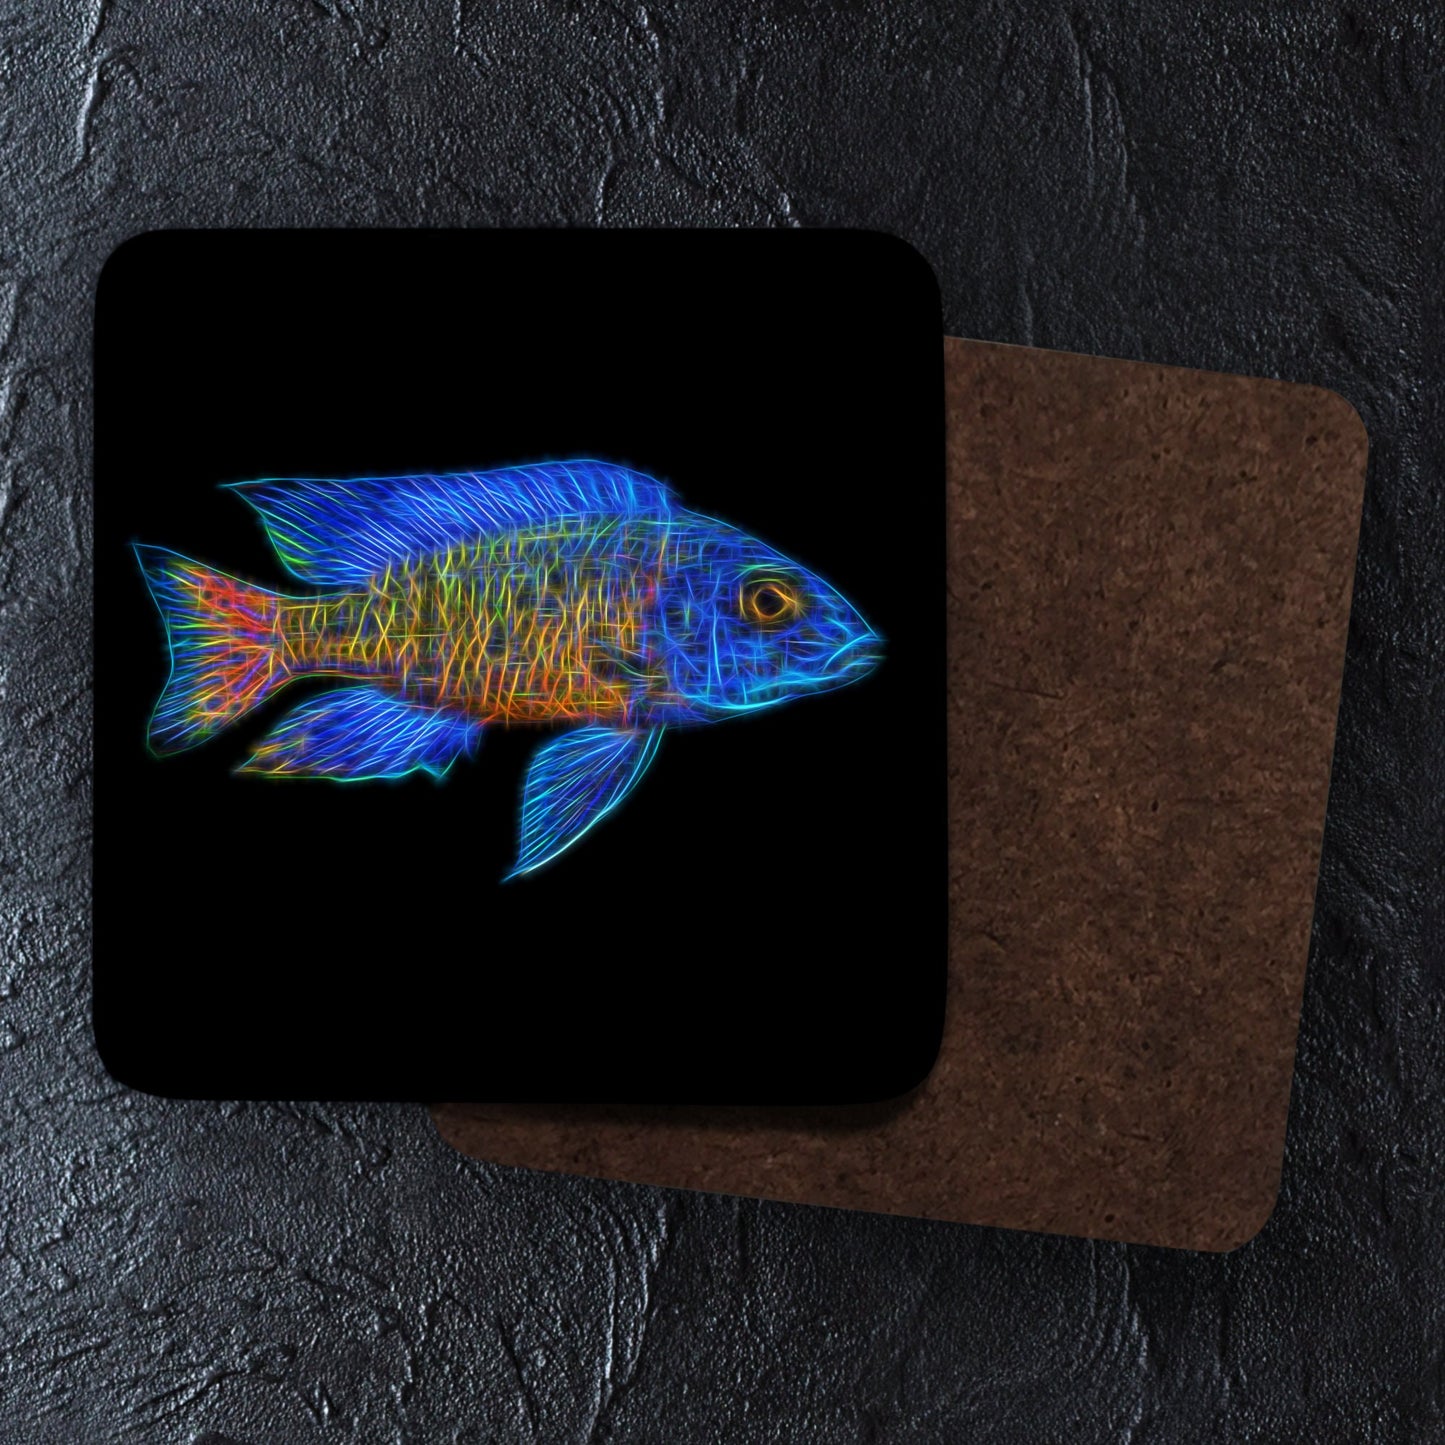 Peacock Cichlid Coaster with Stunning Fractal Art Design. Choose One of 12 Aulonocara Designs